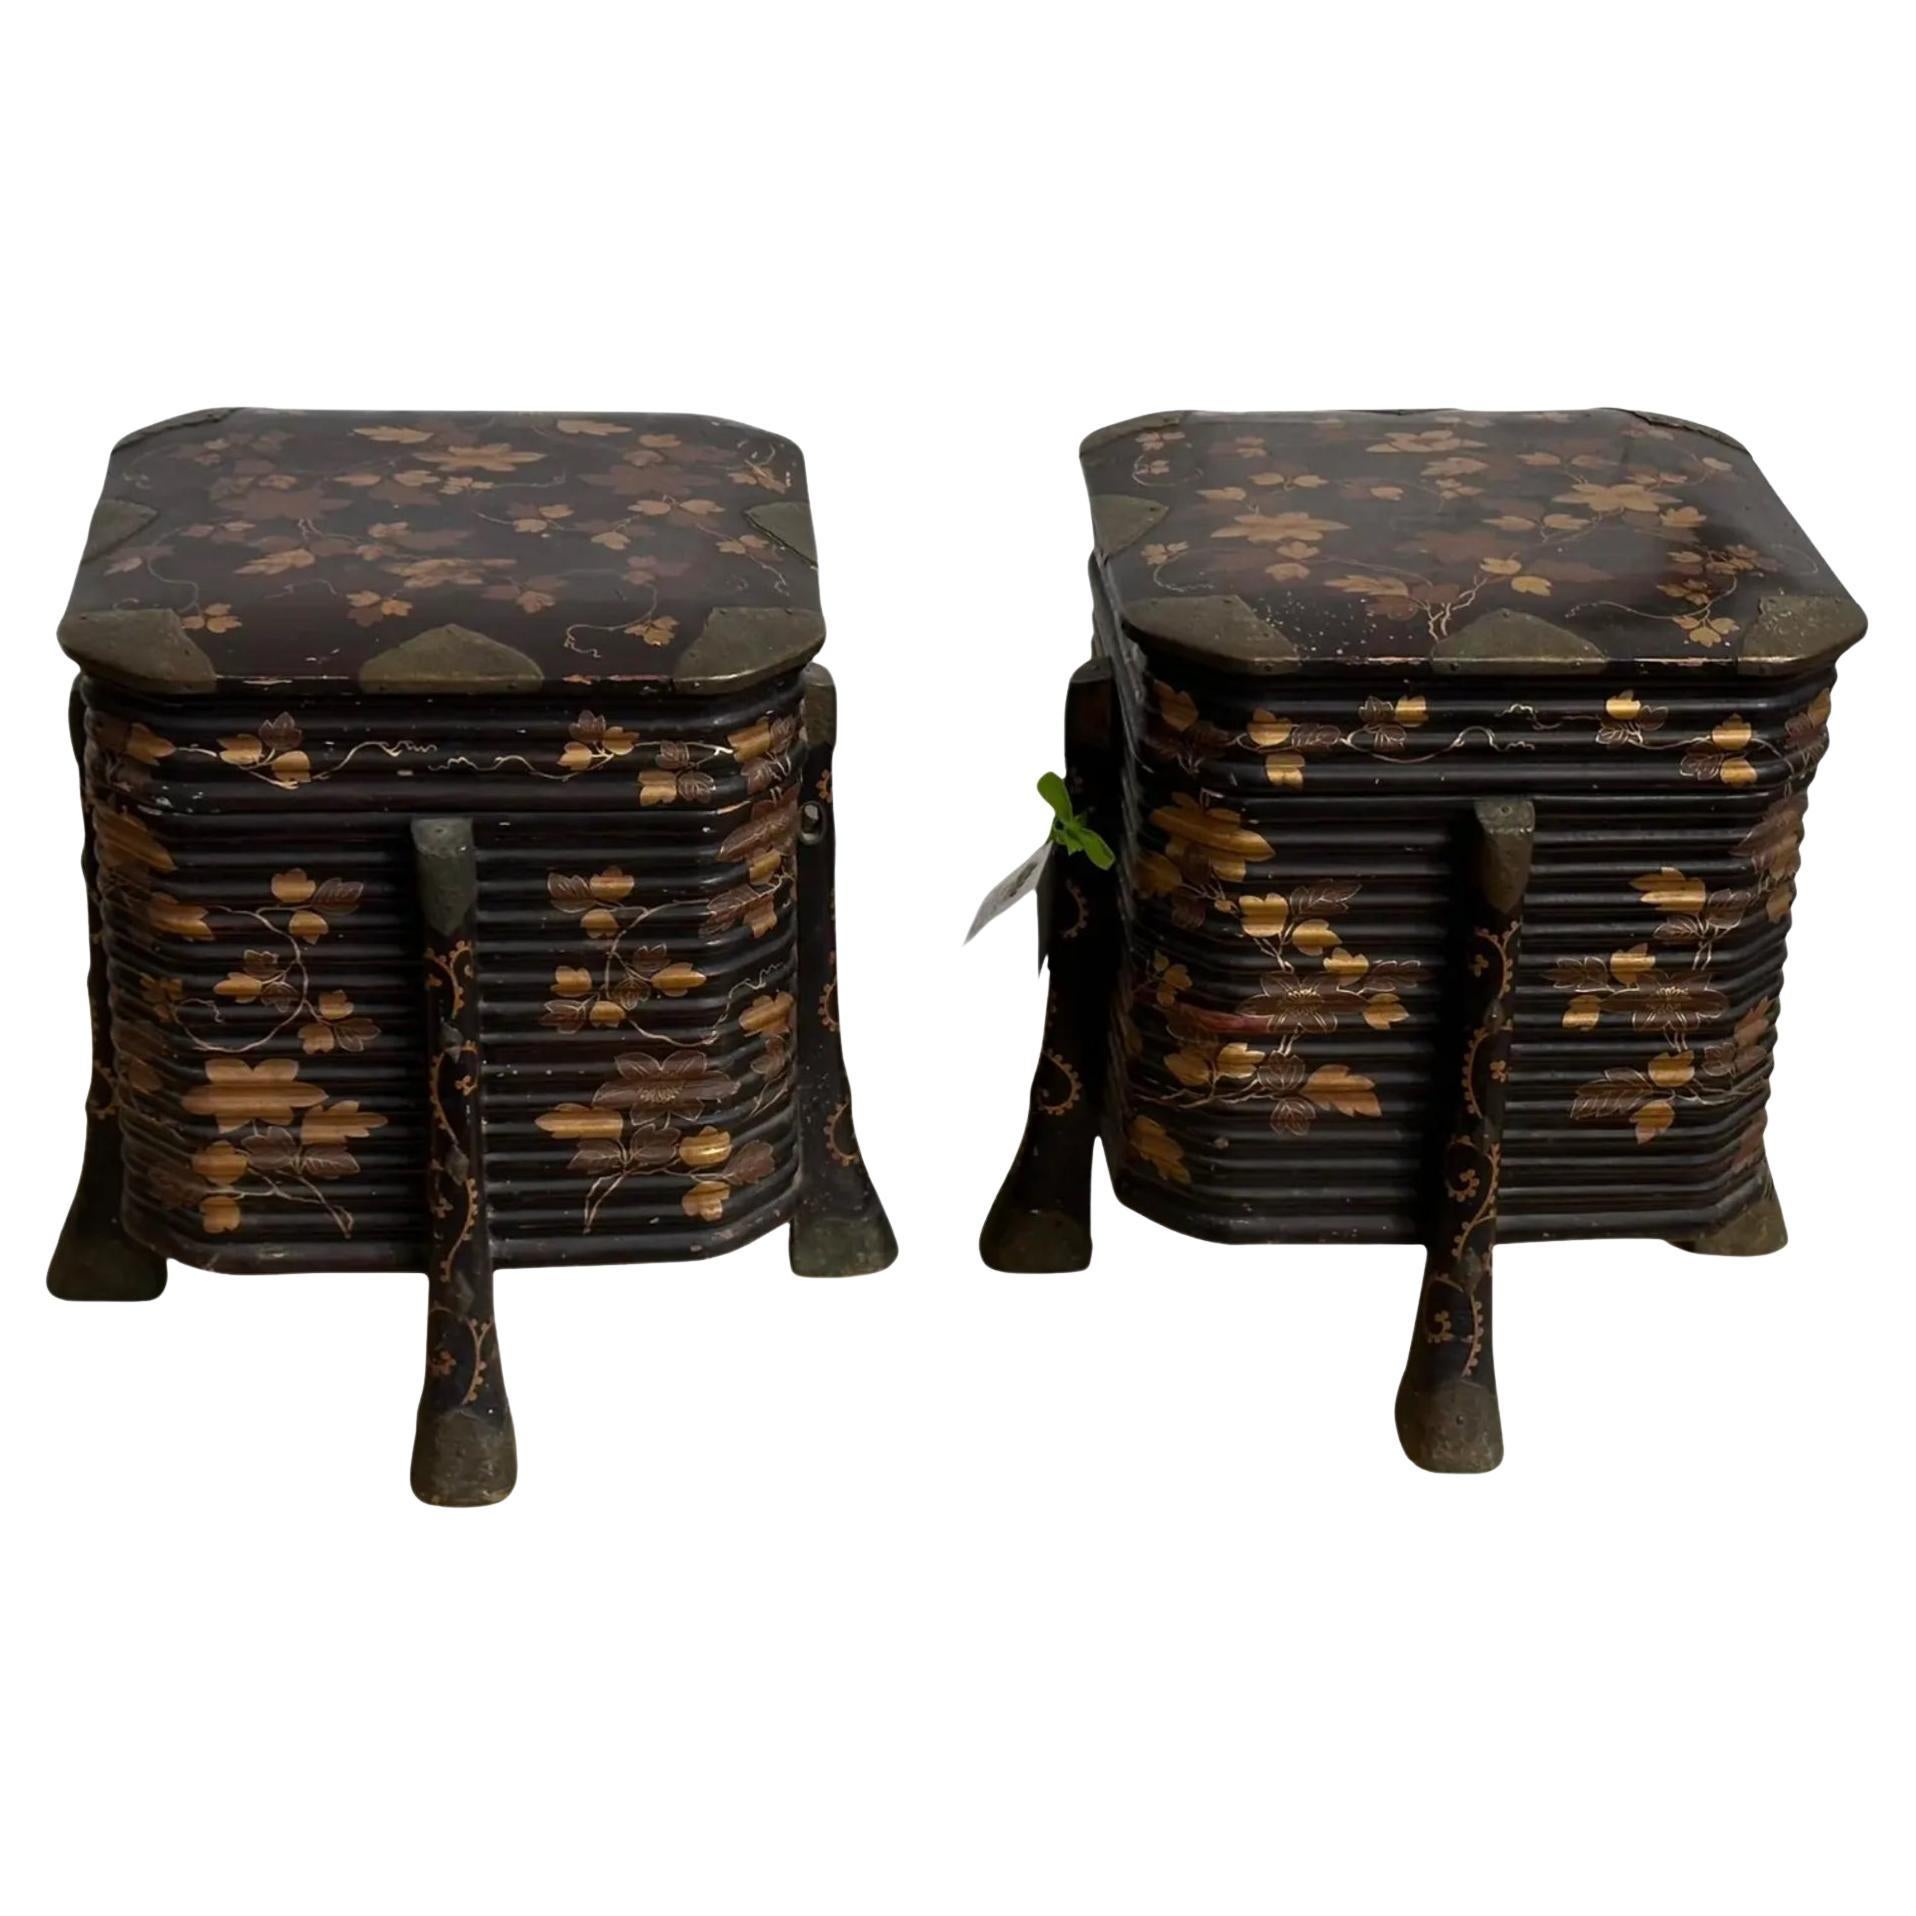 Pair of Japanese Gilt-Metal Mounted, Black & Gold Lacquer Karabitsu Boxes For Sale